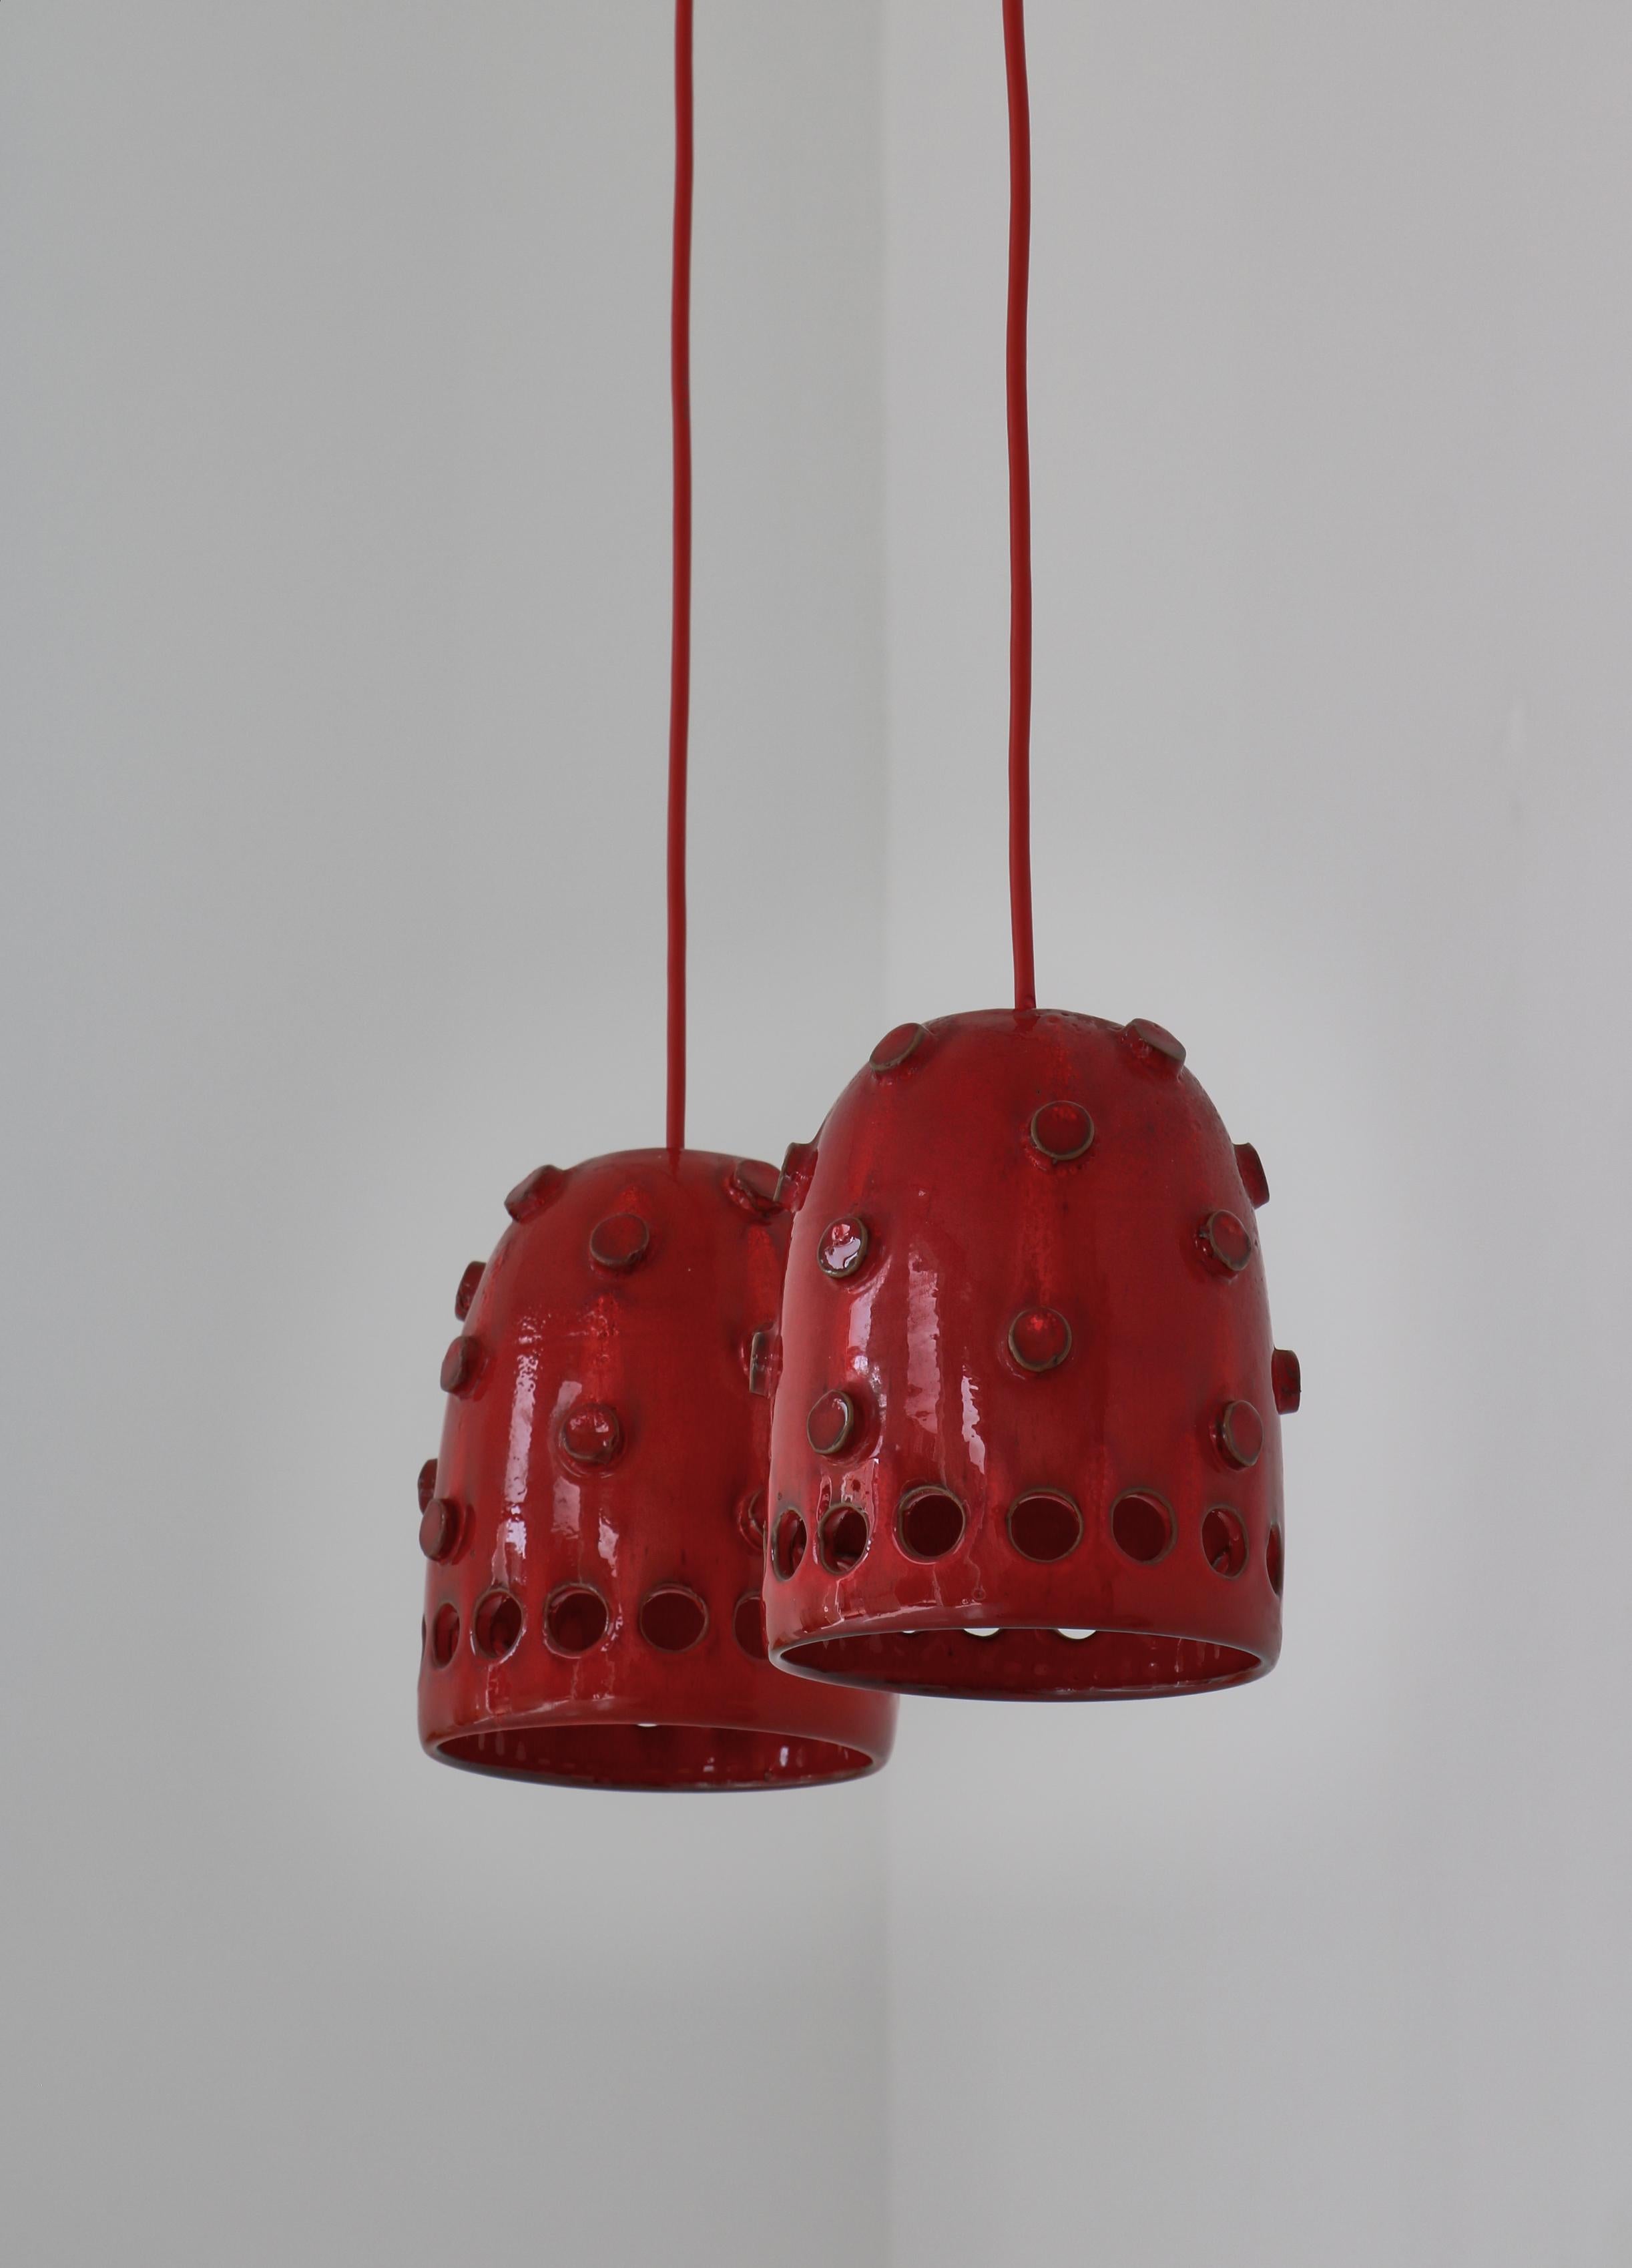 Unique Danish Modern pendants handmade in the 1970s by artist Jette Hellerøe at Axella studio, Denmark. The lamps are made from stoneware and finished in an expressive glossy red glazing. Original red wire included.

While Hans J. Wegner, Kaare